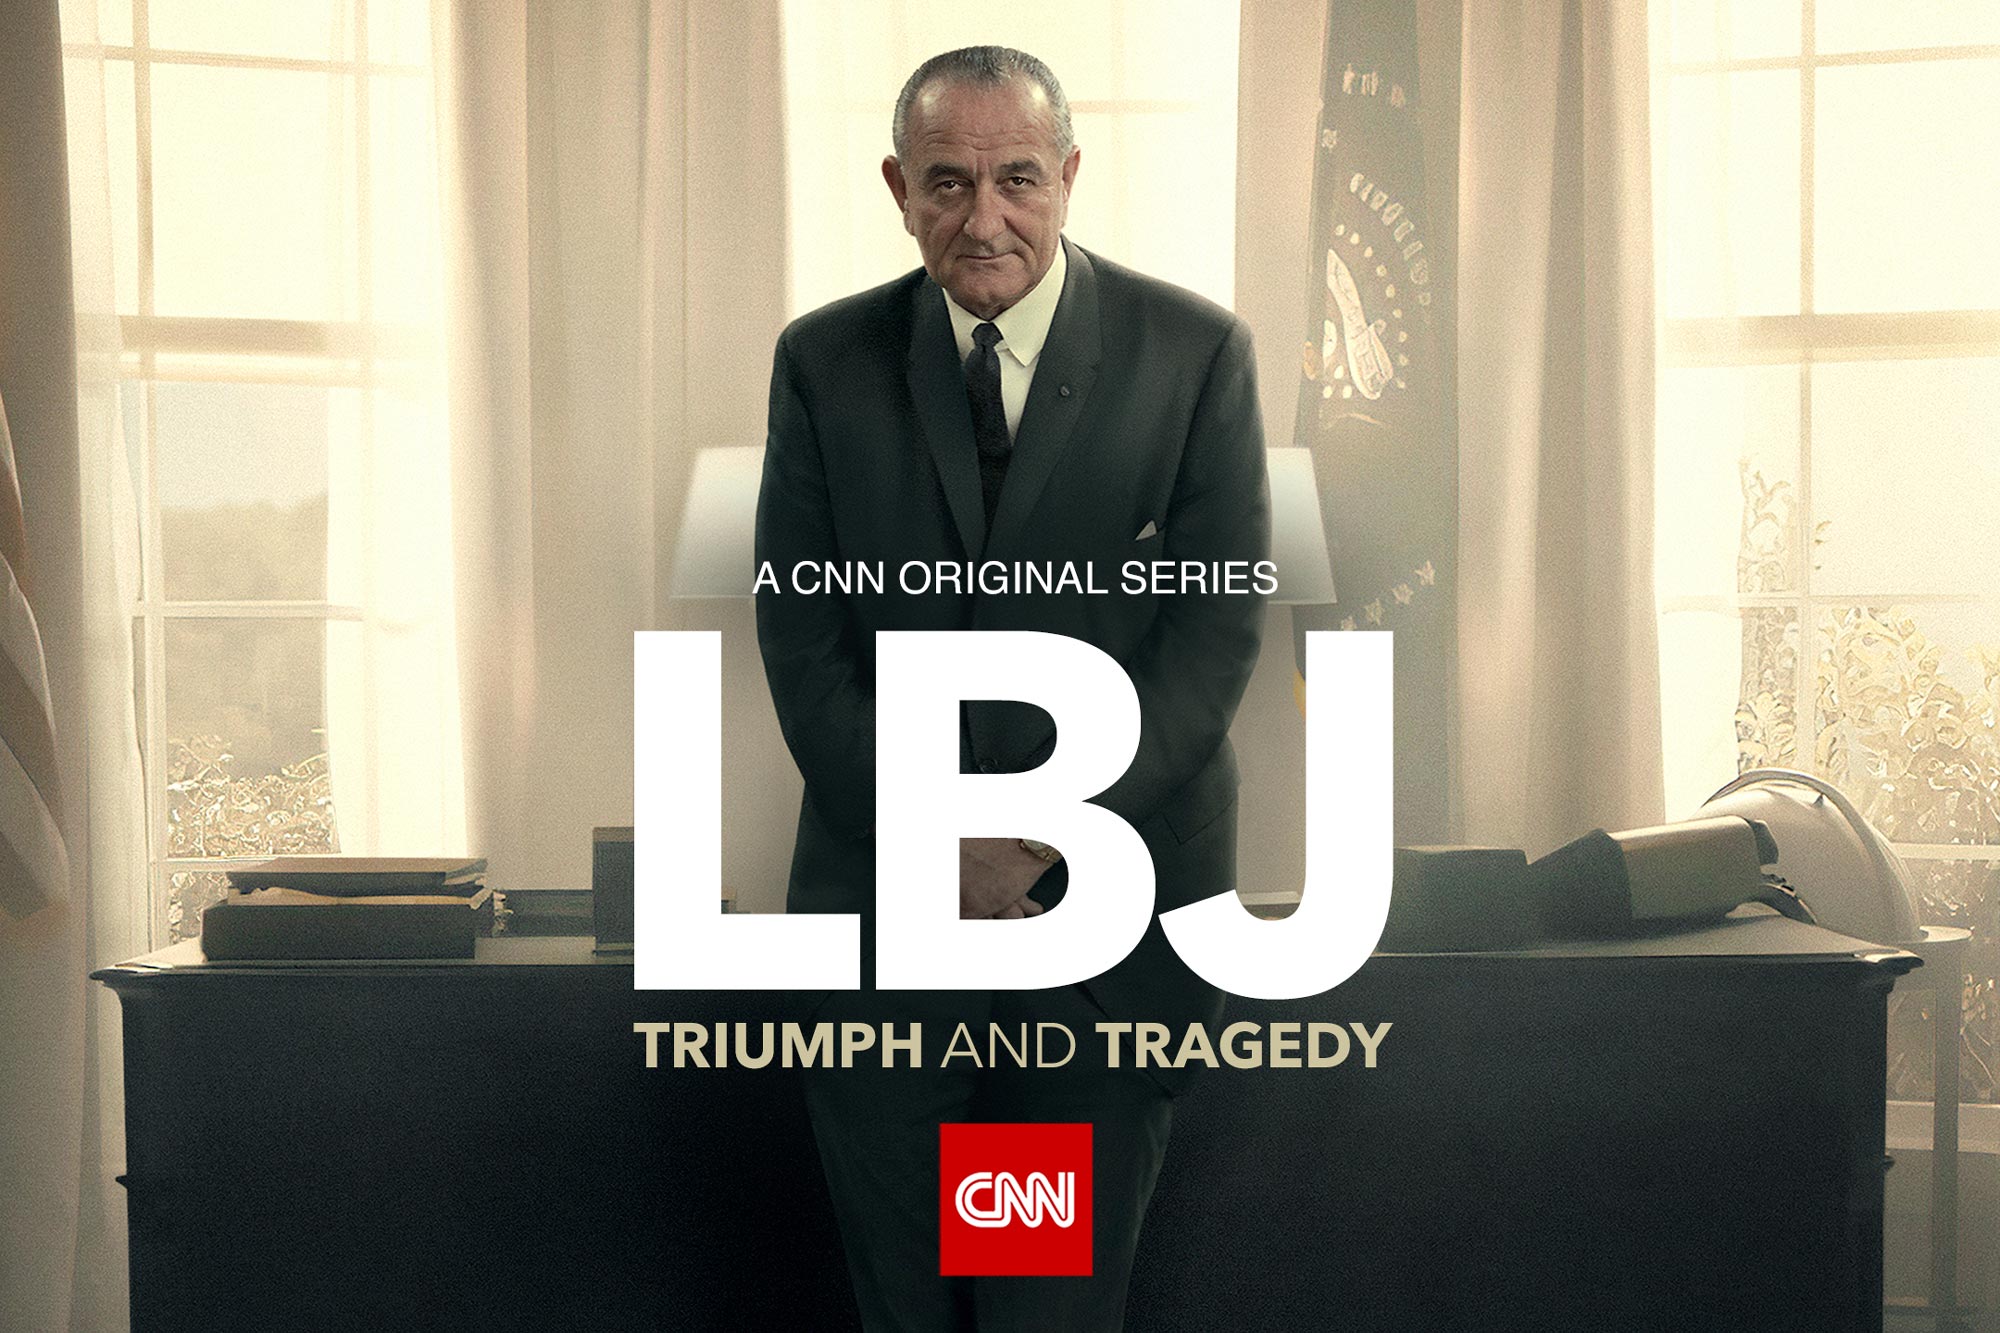 LBJ standing at his desk with text that reads: A CNN Original Series LBJ Triumph and Tragedy